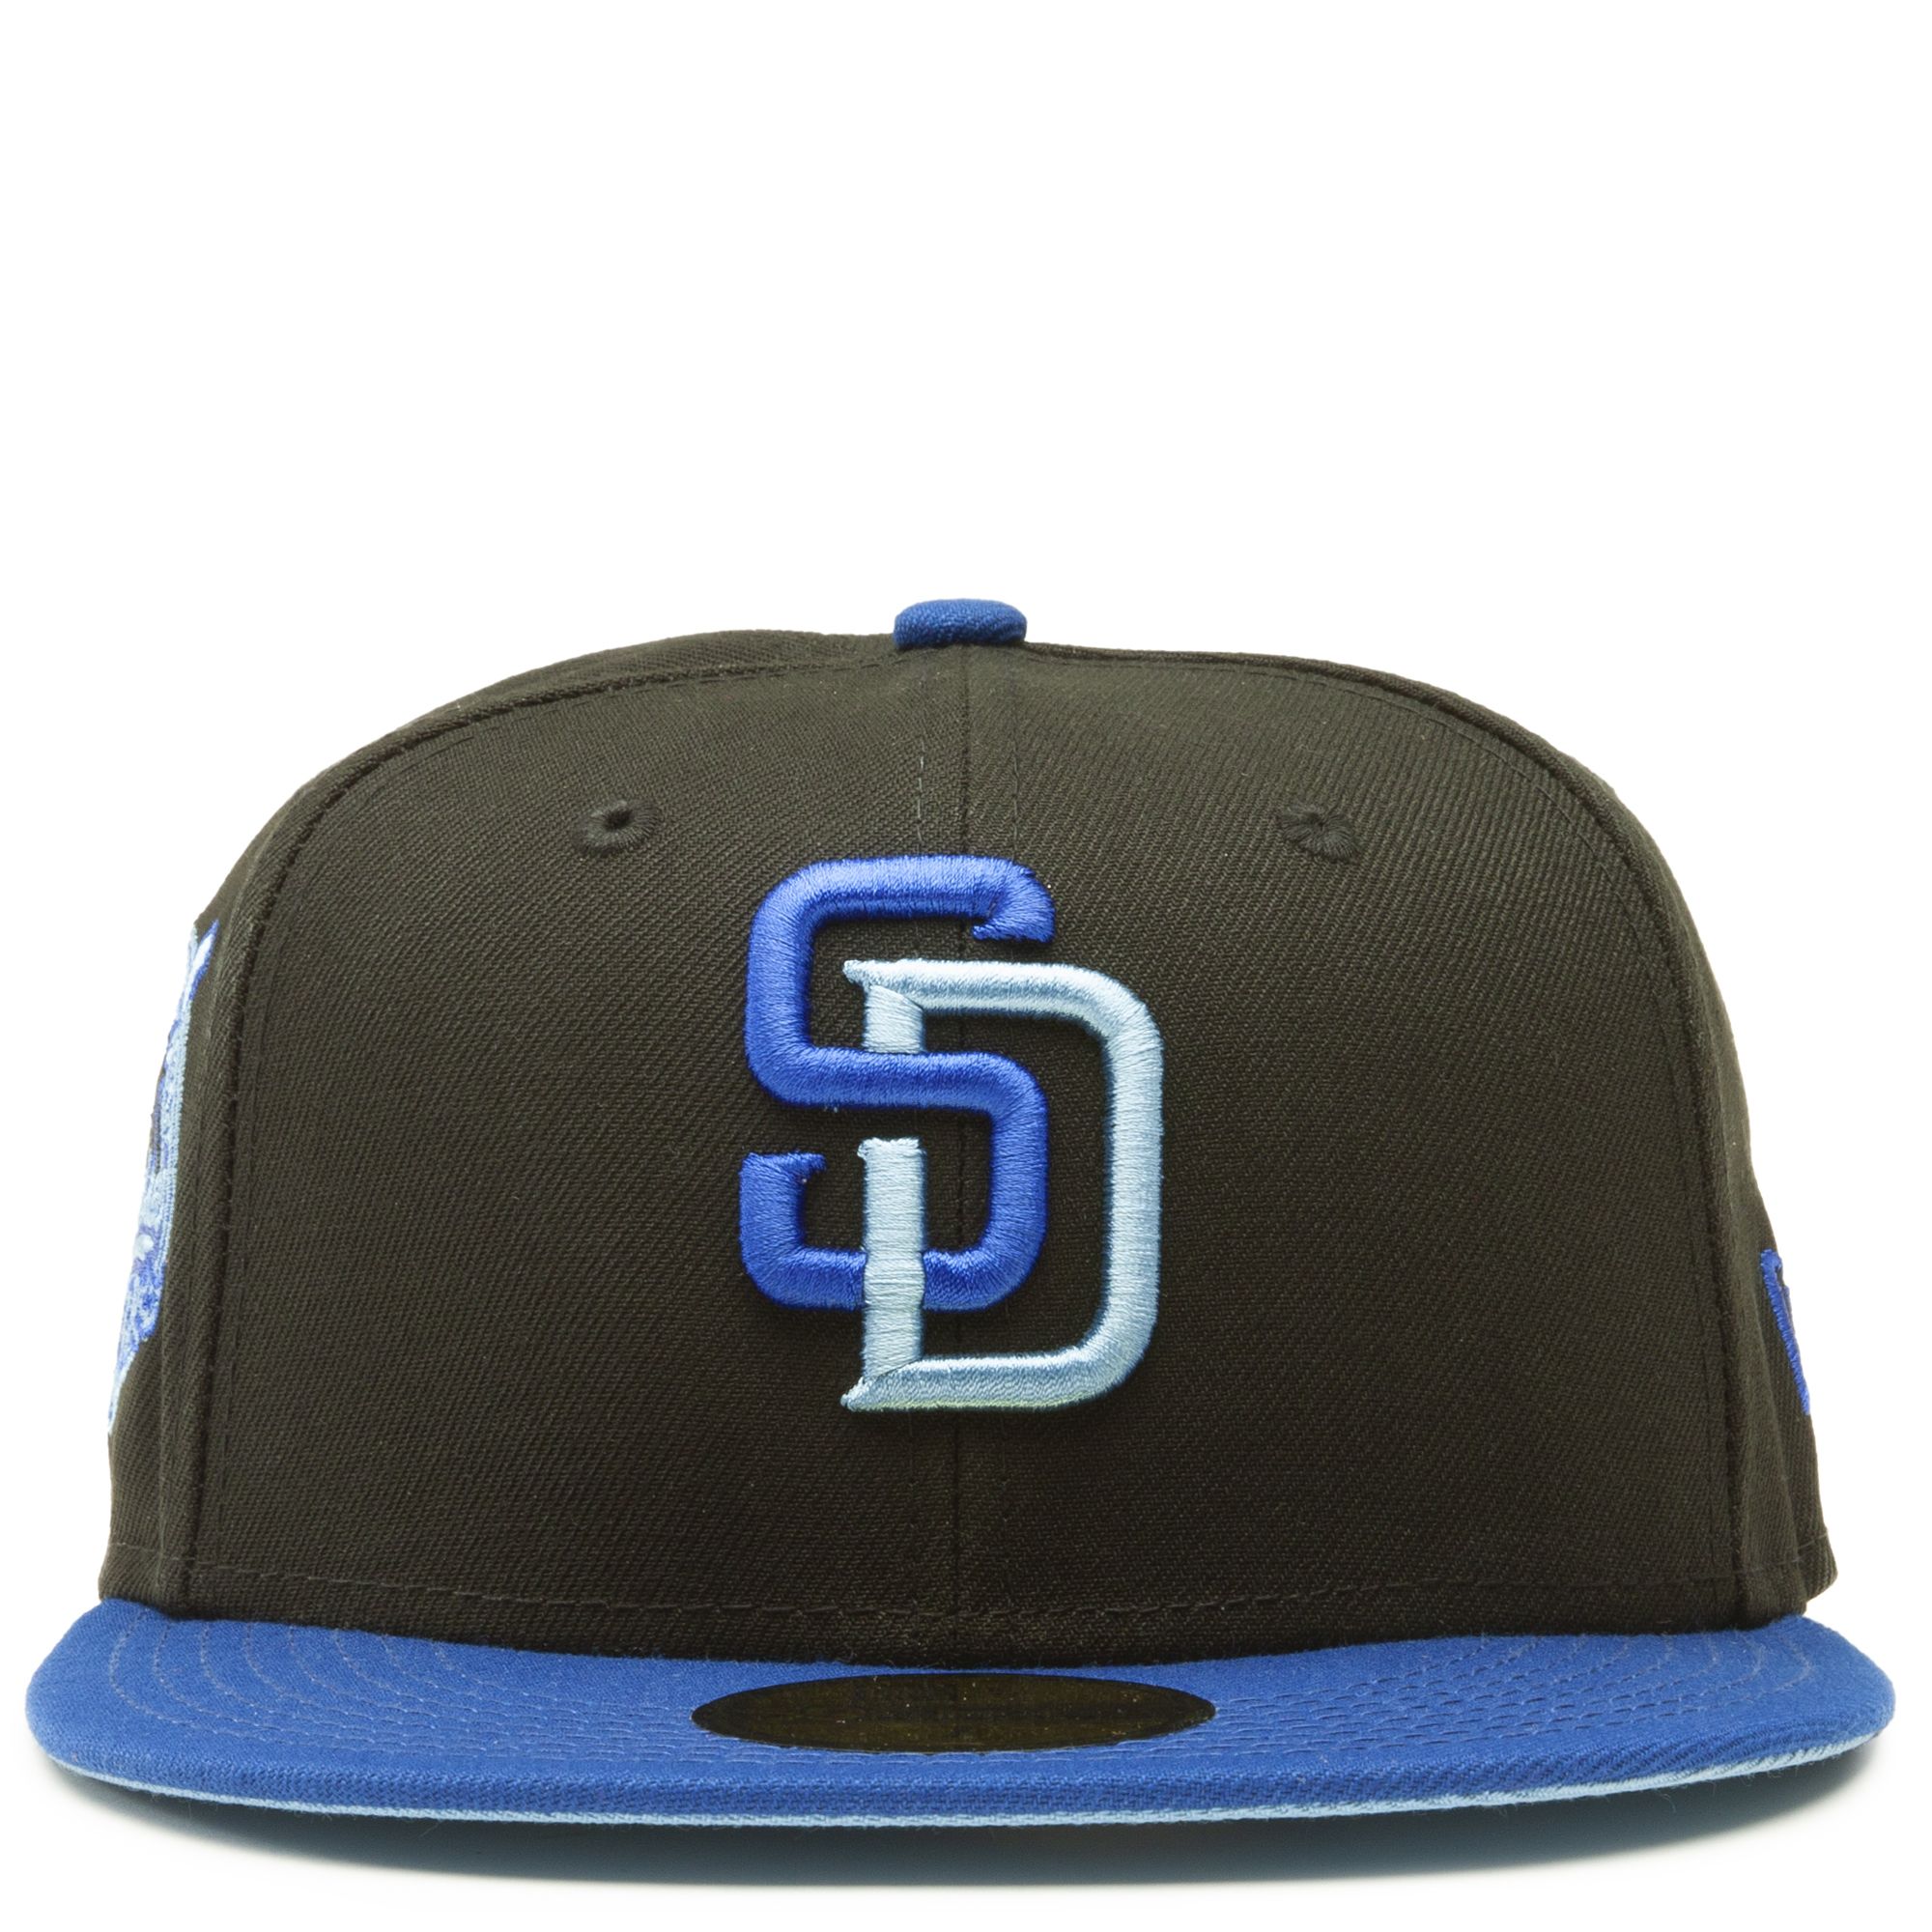 KTZ San Diego Padres Retro Stock 59fifty Fitted Cap in Blue for Men